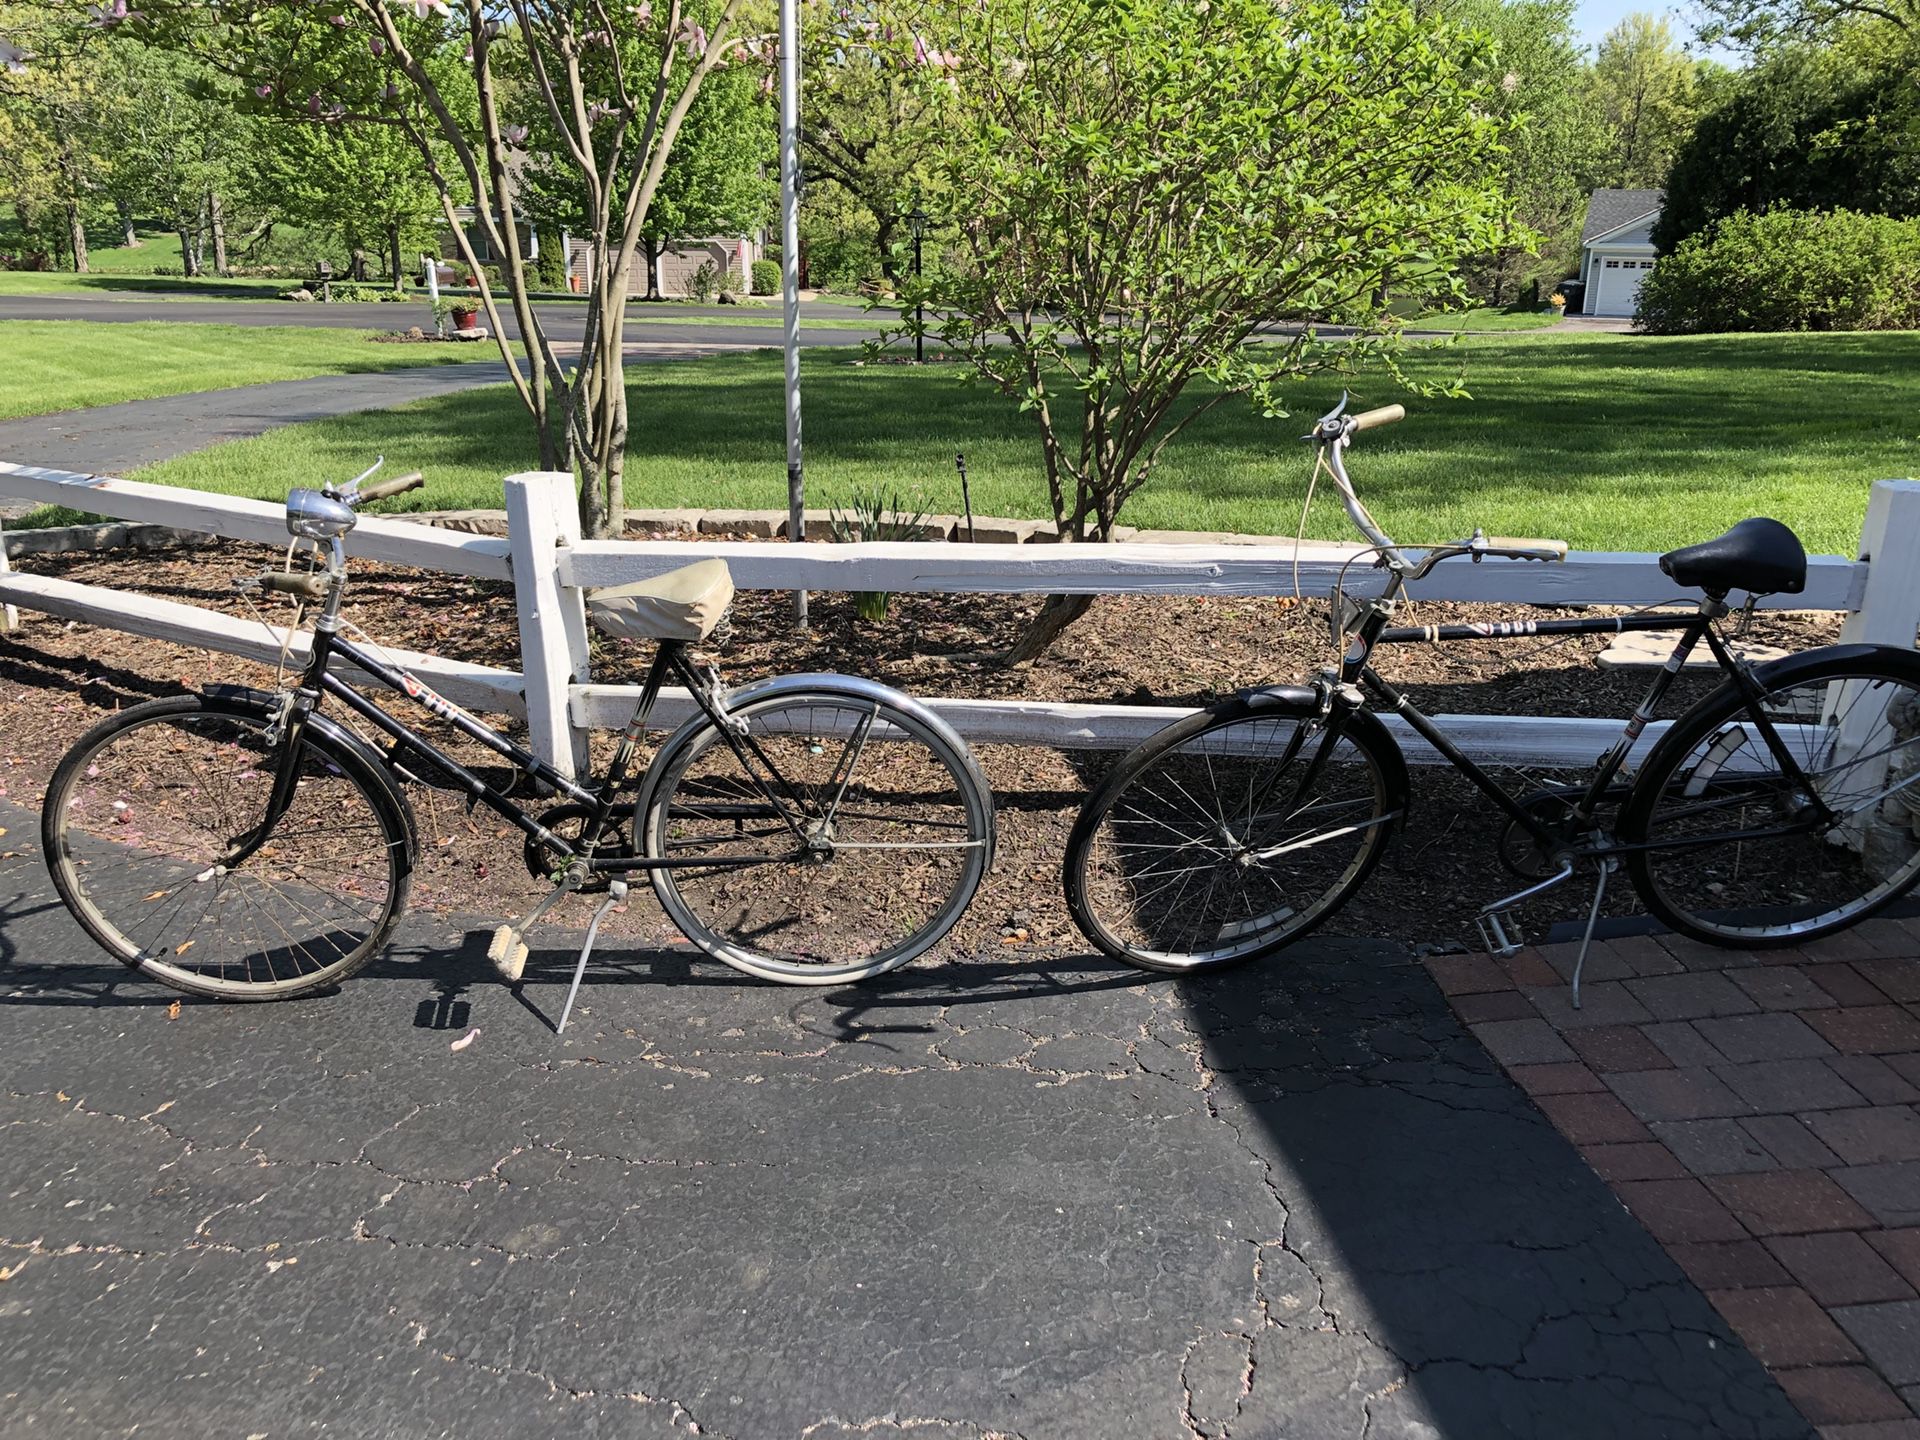 Matching his and hers old bikes. Vintage bikes from the 60’s including schwinn 60’s world tourist. All 3 bicycles for $75